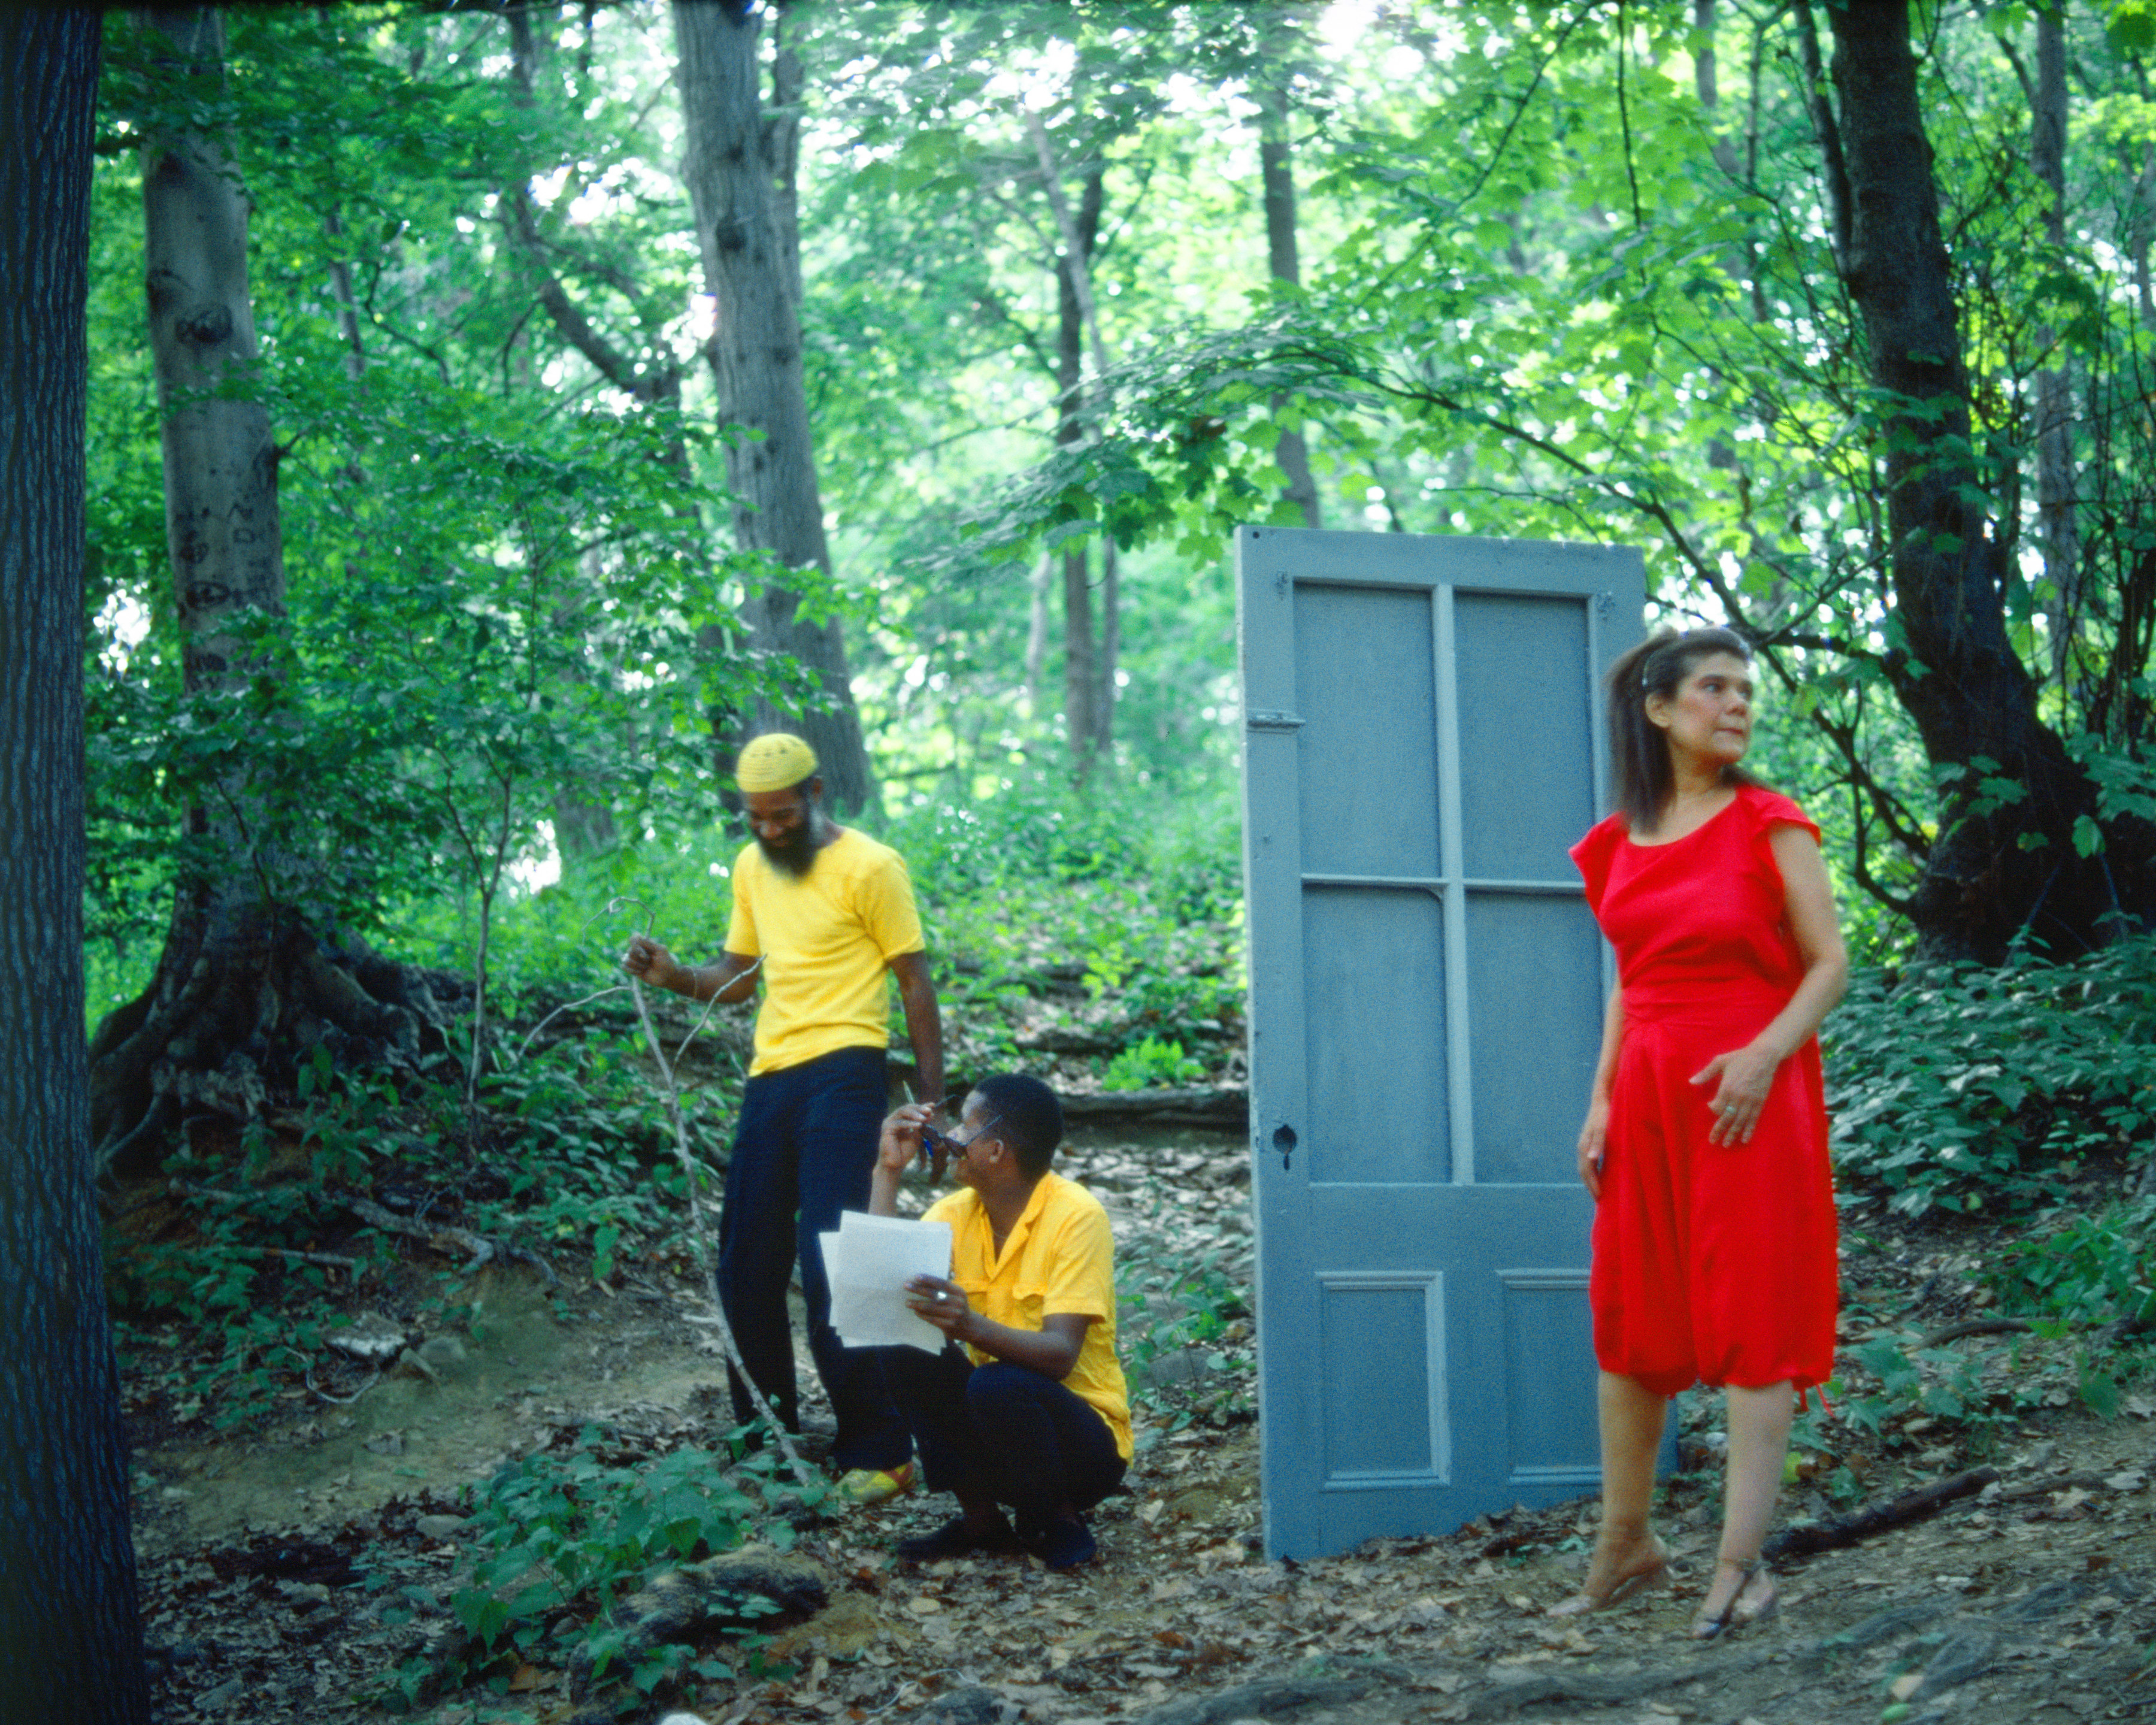 Rivers, First Draft: The Woman in Red hesitates outside after the Black Male Artists in Yellow eject her, 1982/2015, Digital C-print from Kodachrome 35mm slides in 48 parts, 16h x 20w in (40.64h x 50.80w cm)